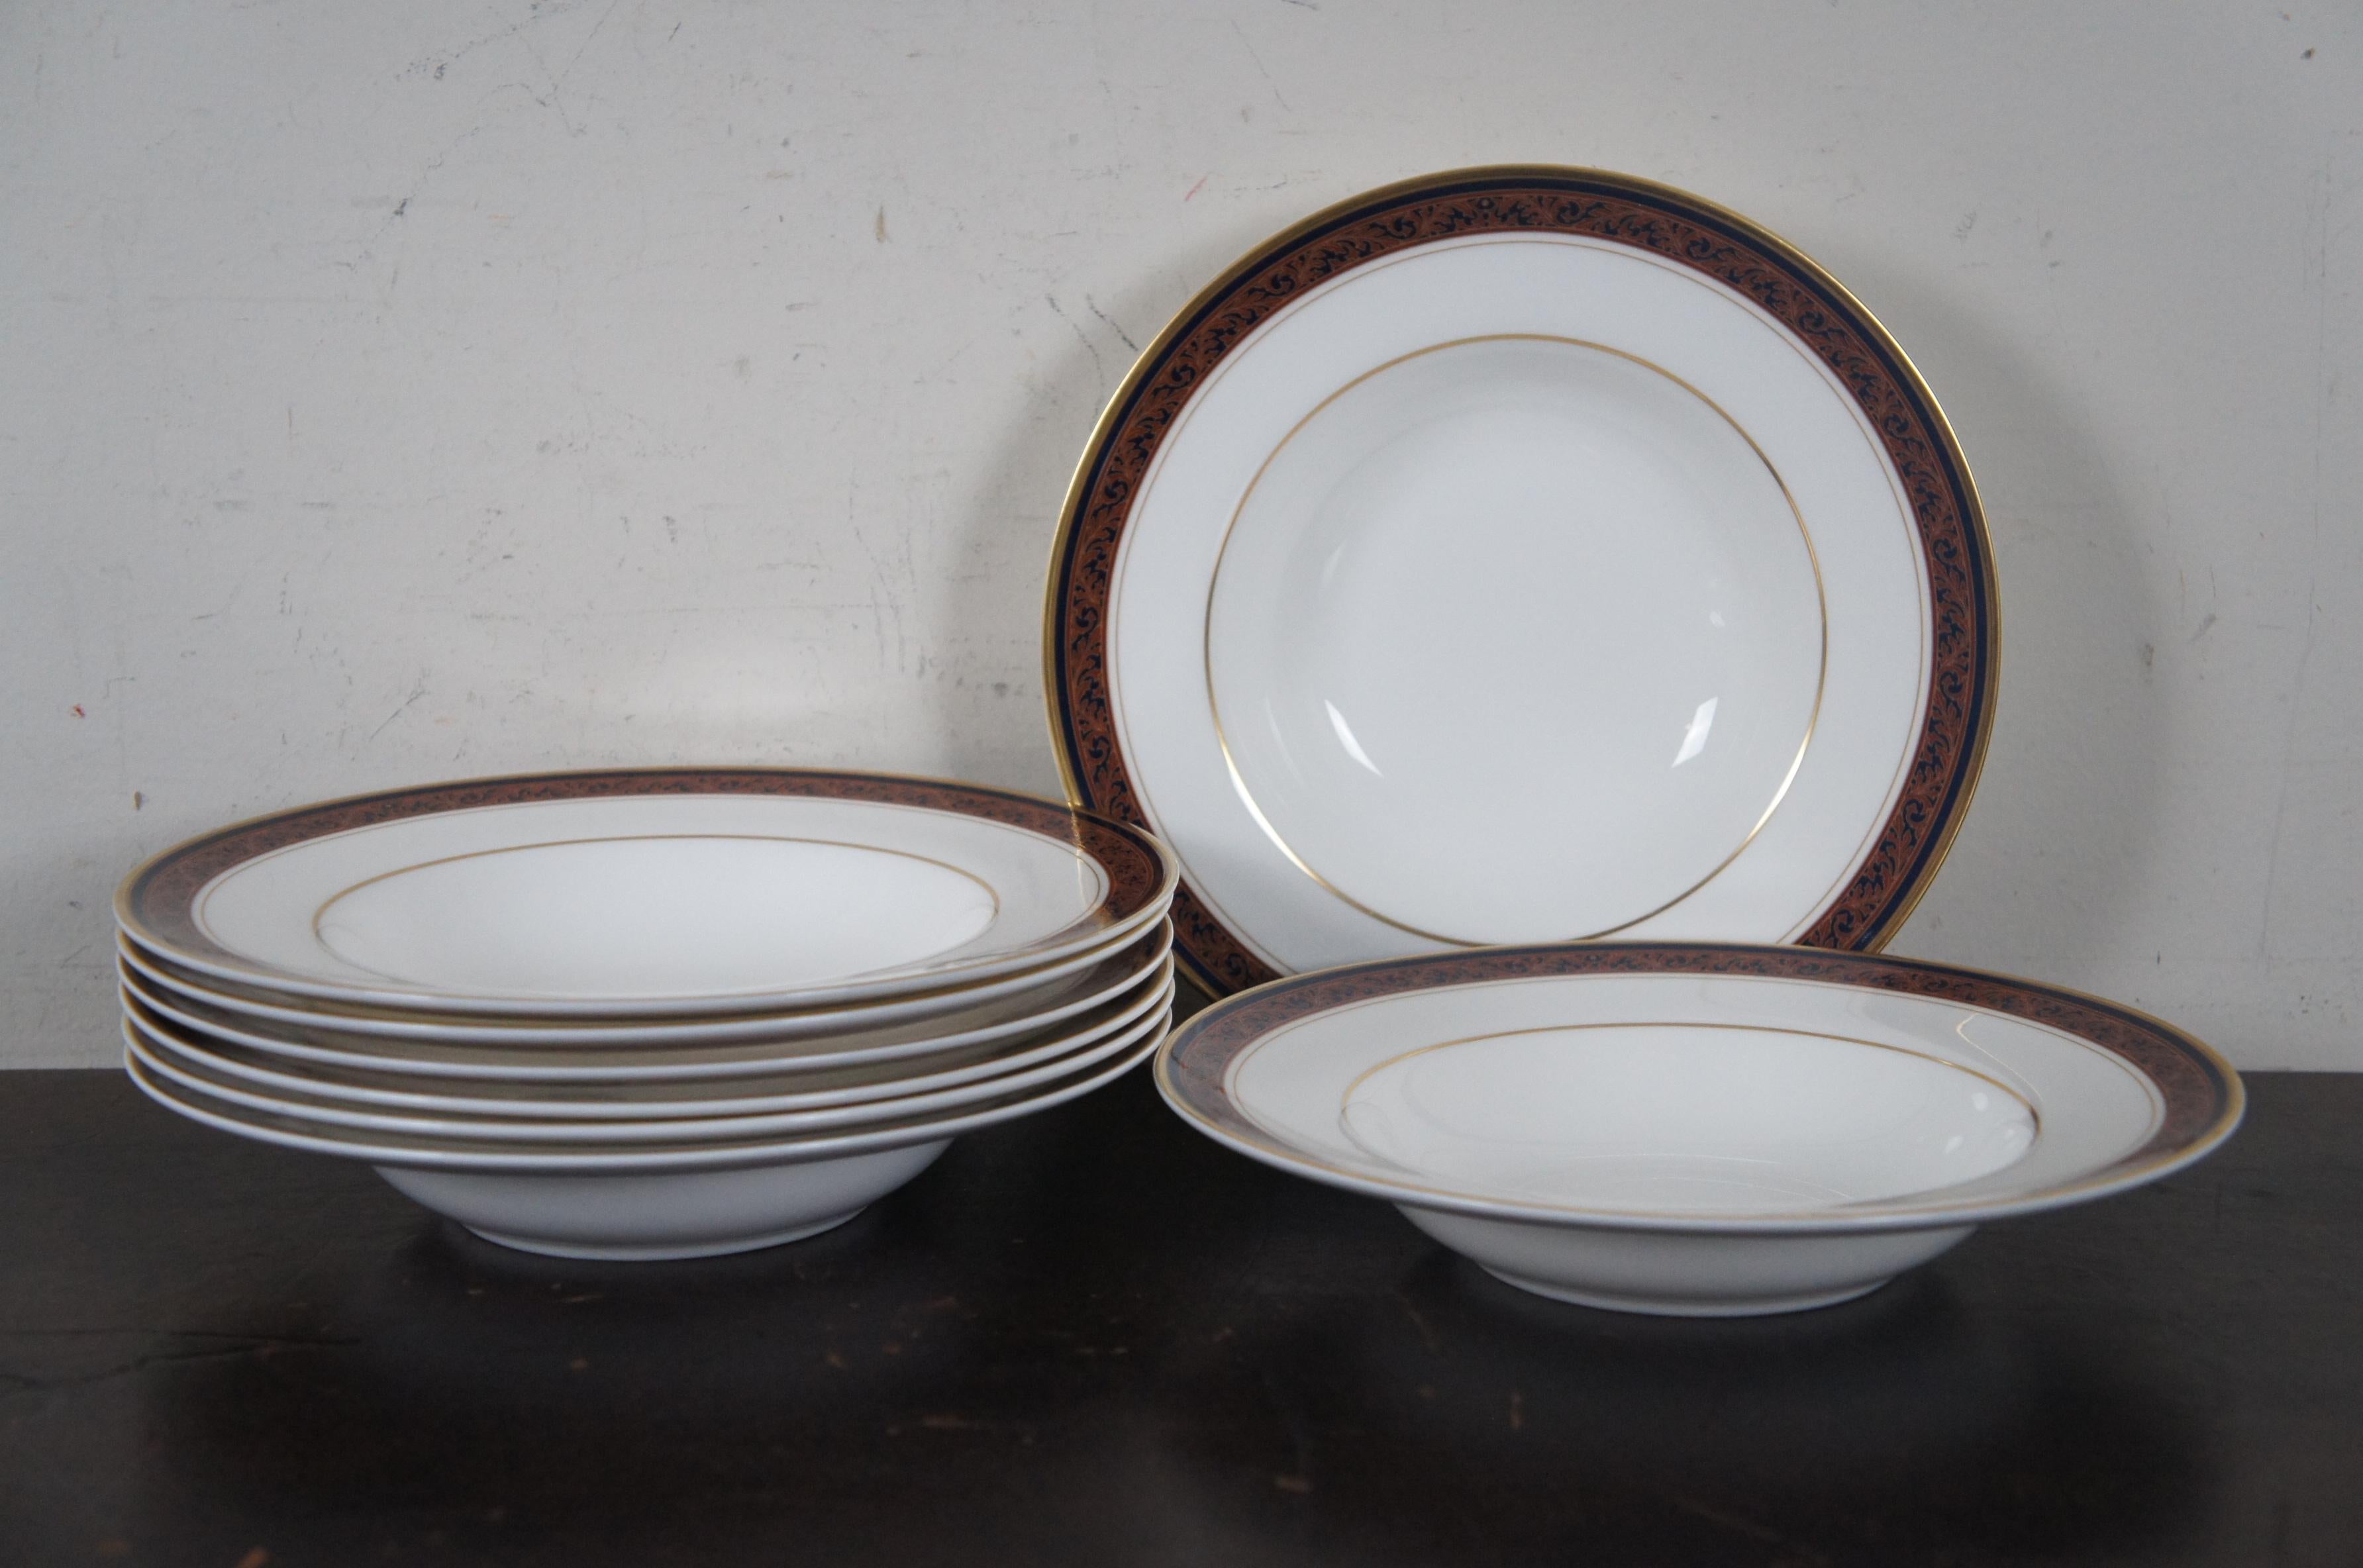 57 Pc Royal Doulton Regal Crest H5221 English Bone China Dinnerware Set, 1993 In Good Condition For Sale In Dayton, OH